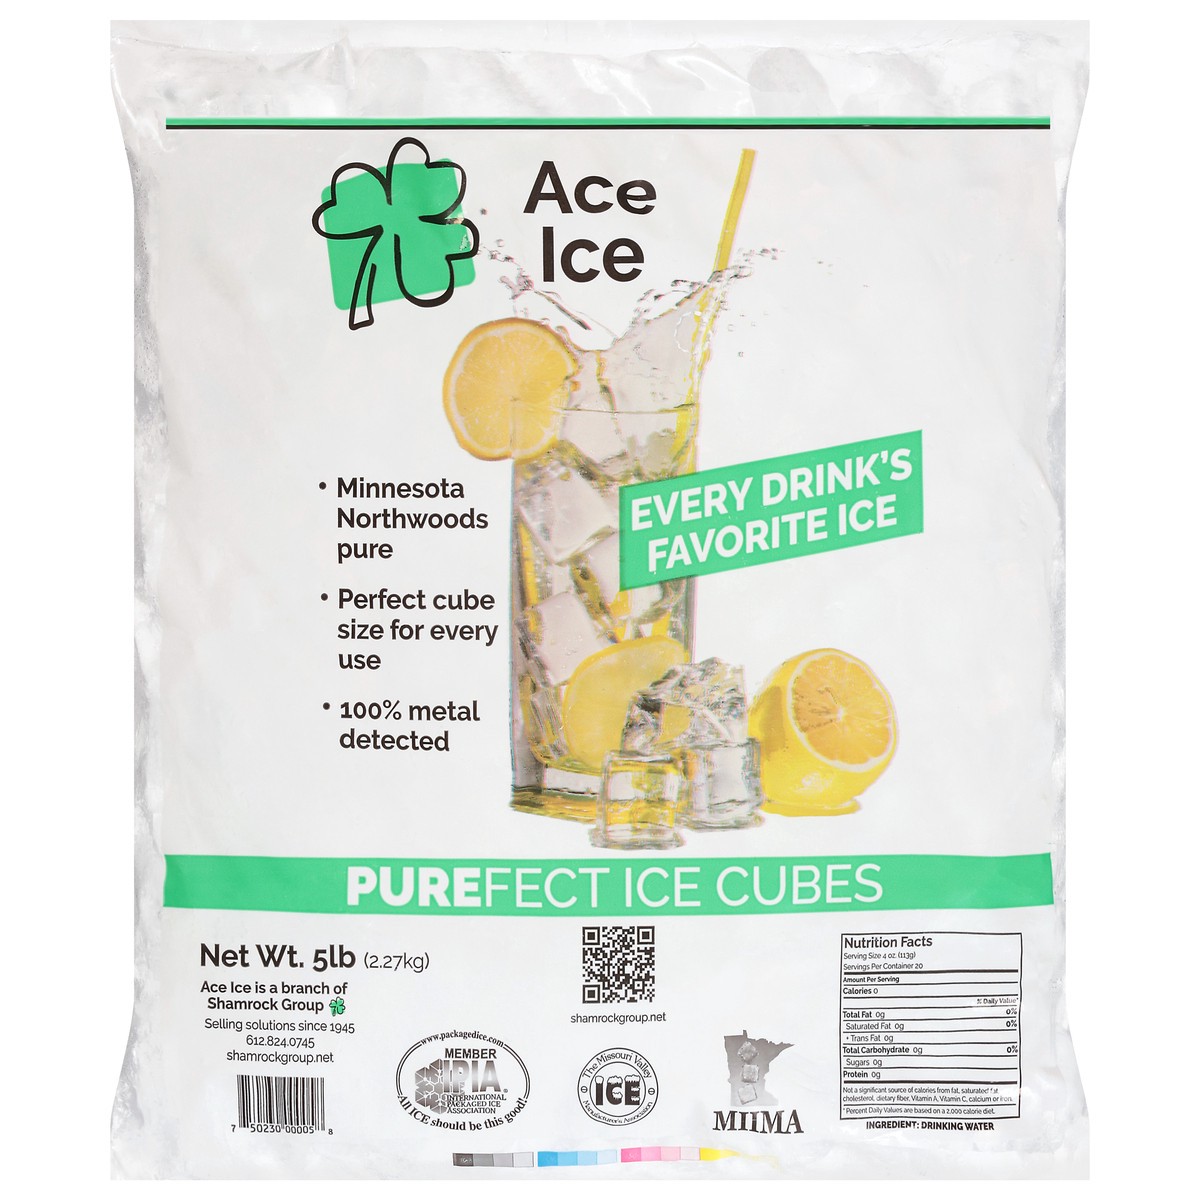 slide 4 of 14, Ace Ice Purefect Ice Cubes 5 lb, 5 lb